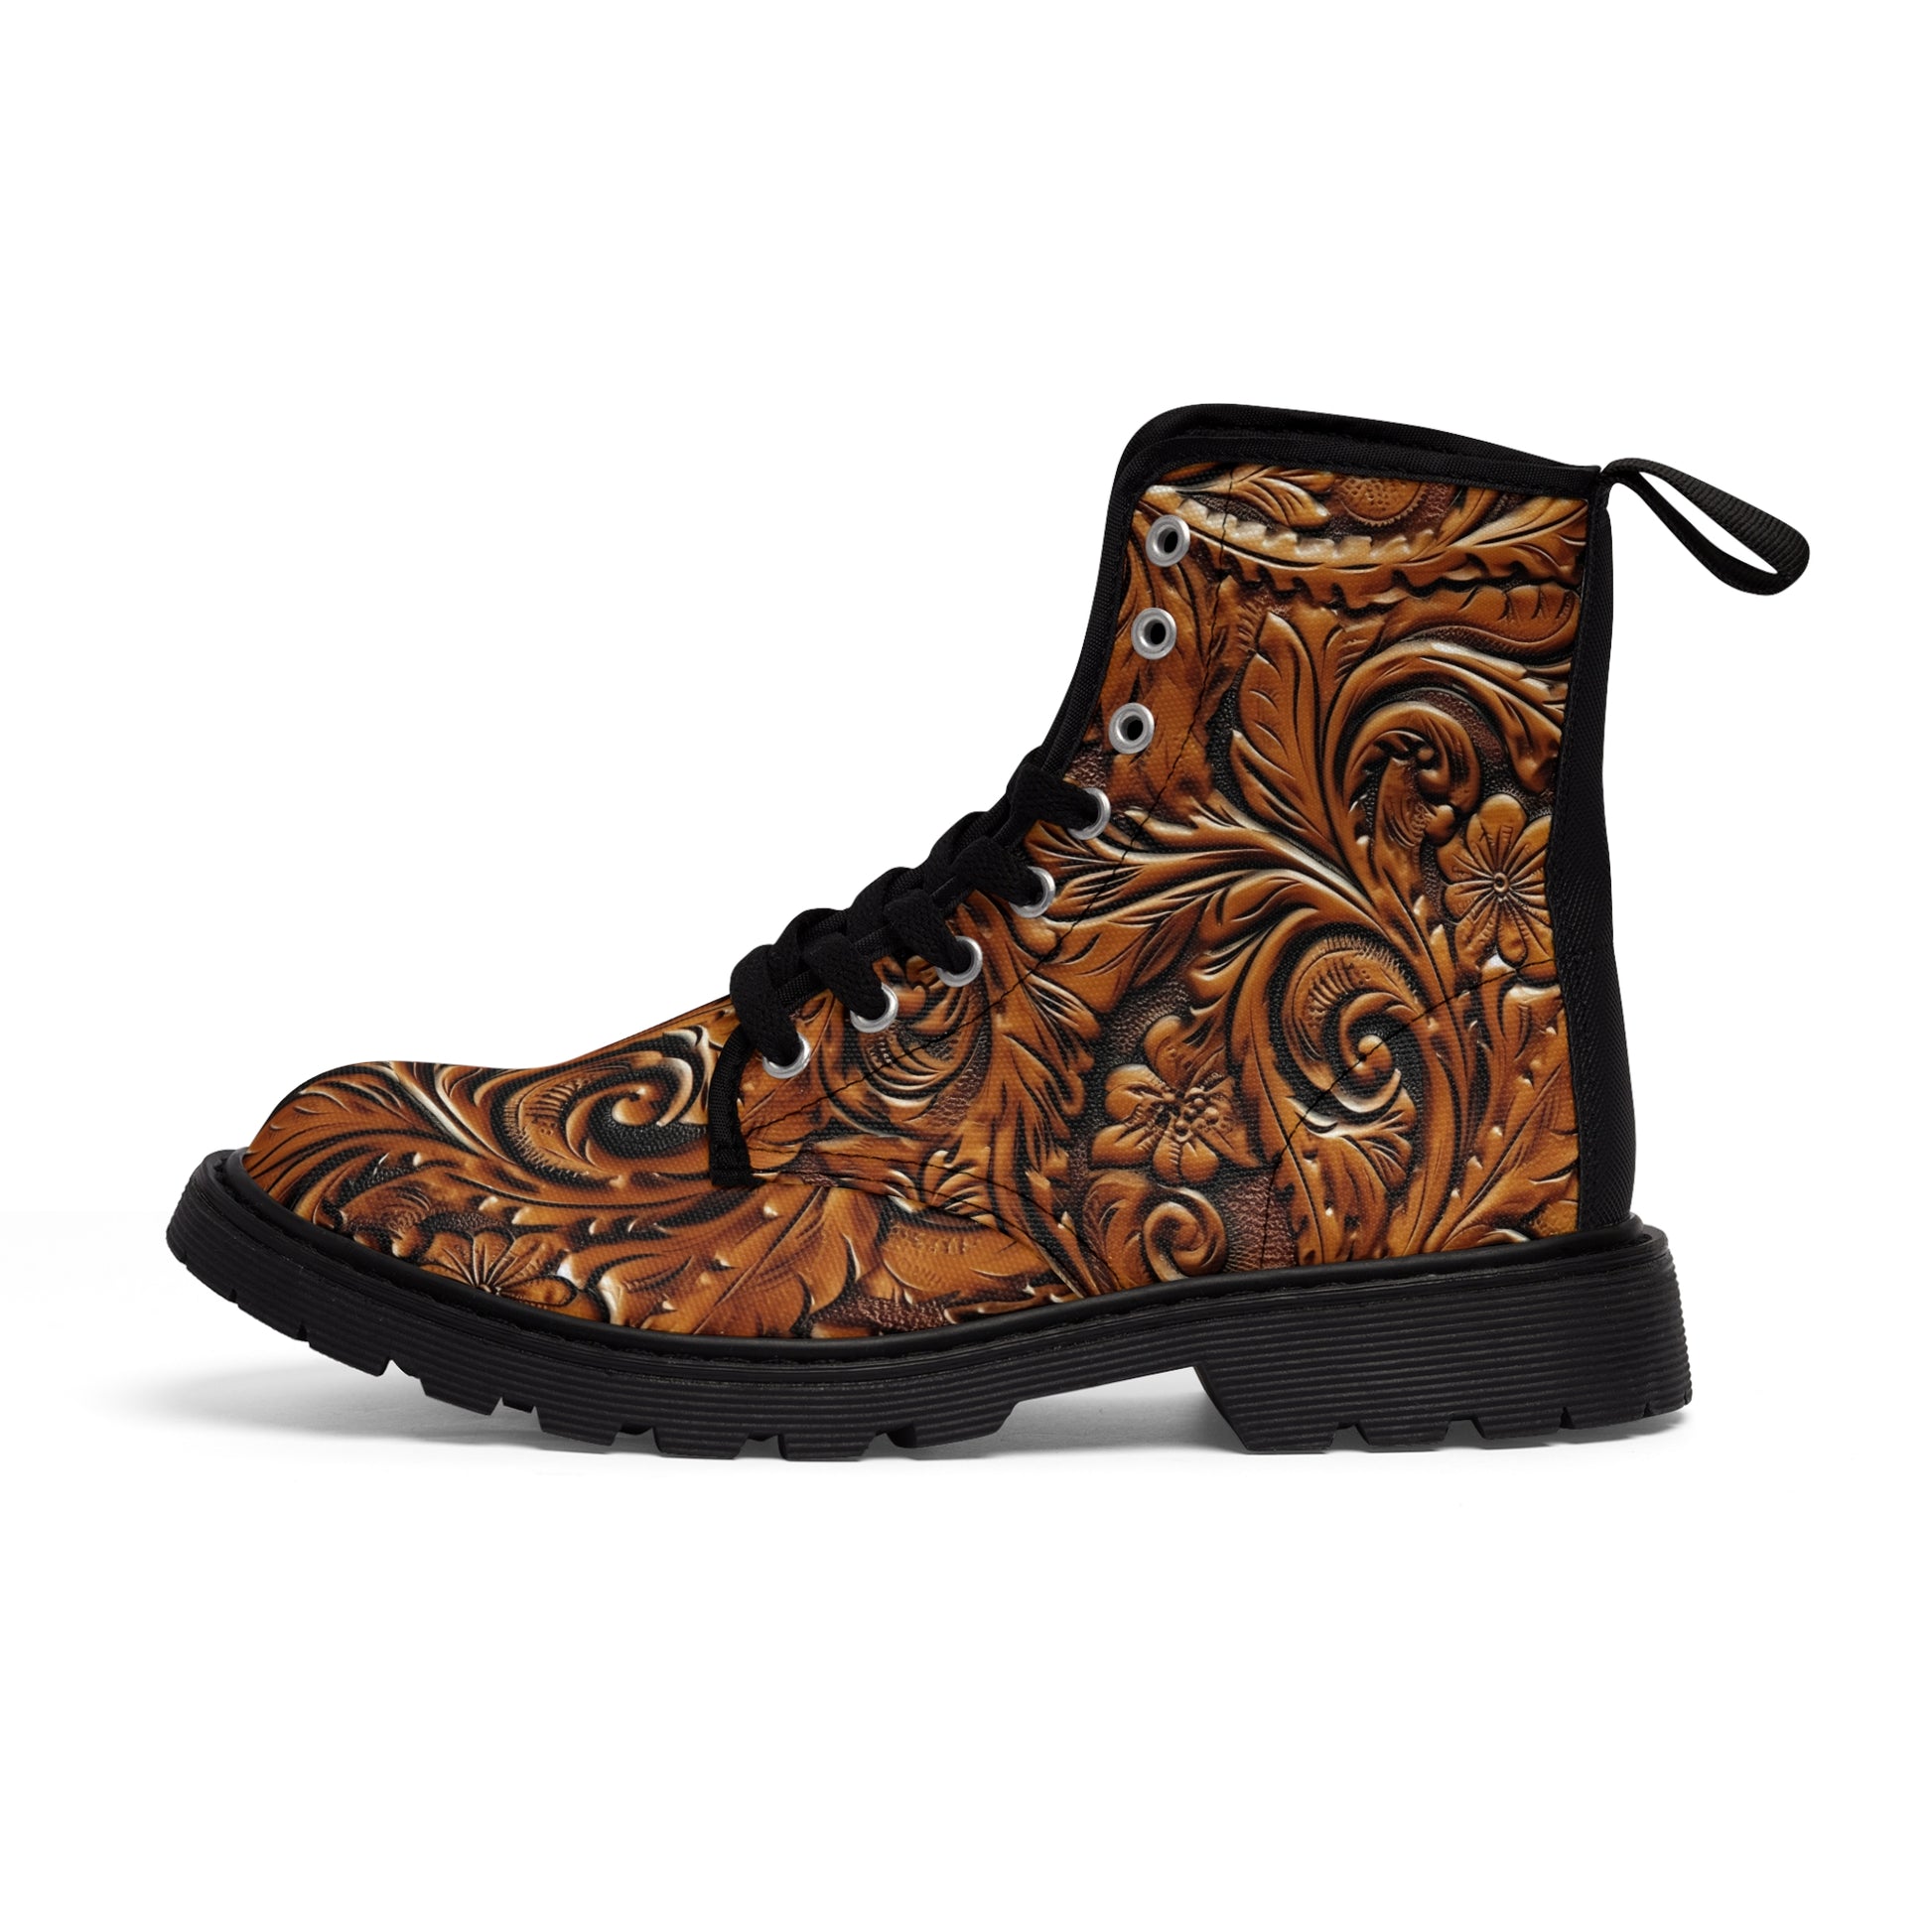 Tooled Leather Women's Canvas Boots (Black) by Studio Ten Design